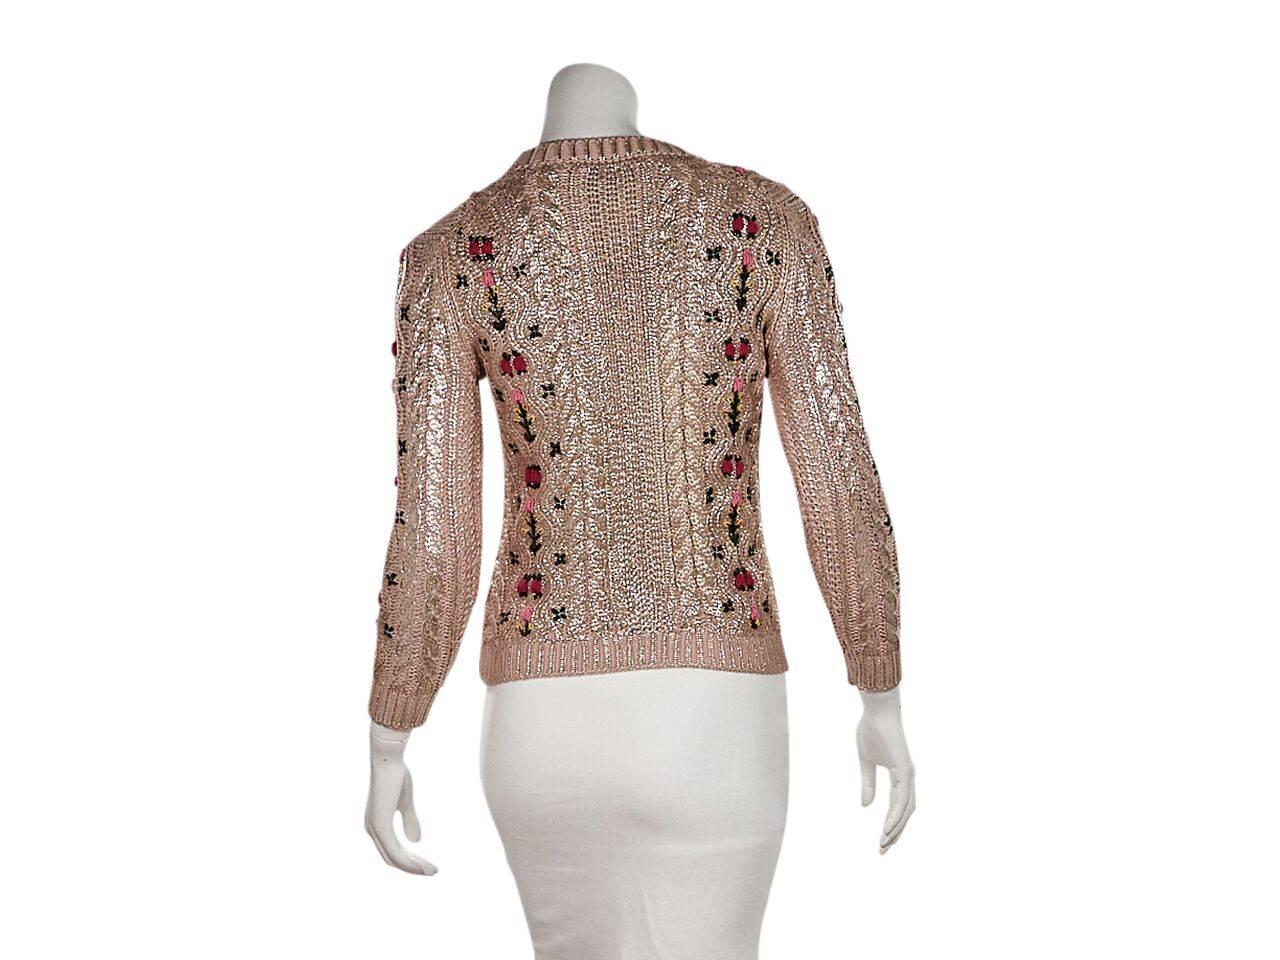 Product details:  Metallic pink cable knit sweater by Gucci.  Accented with multicolor floral embroidery.  Roundneck.  Bracelet-length sleeves.  Ribbed cuffs.  Pullover style. 
Condition: Pre-owned. Very good.
Est. Retail $ 1,295.00